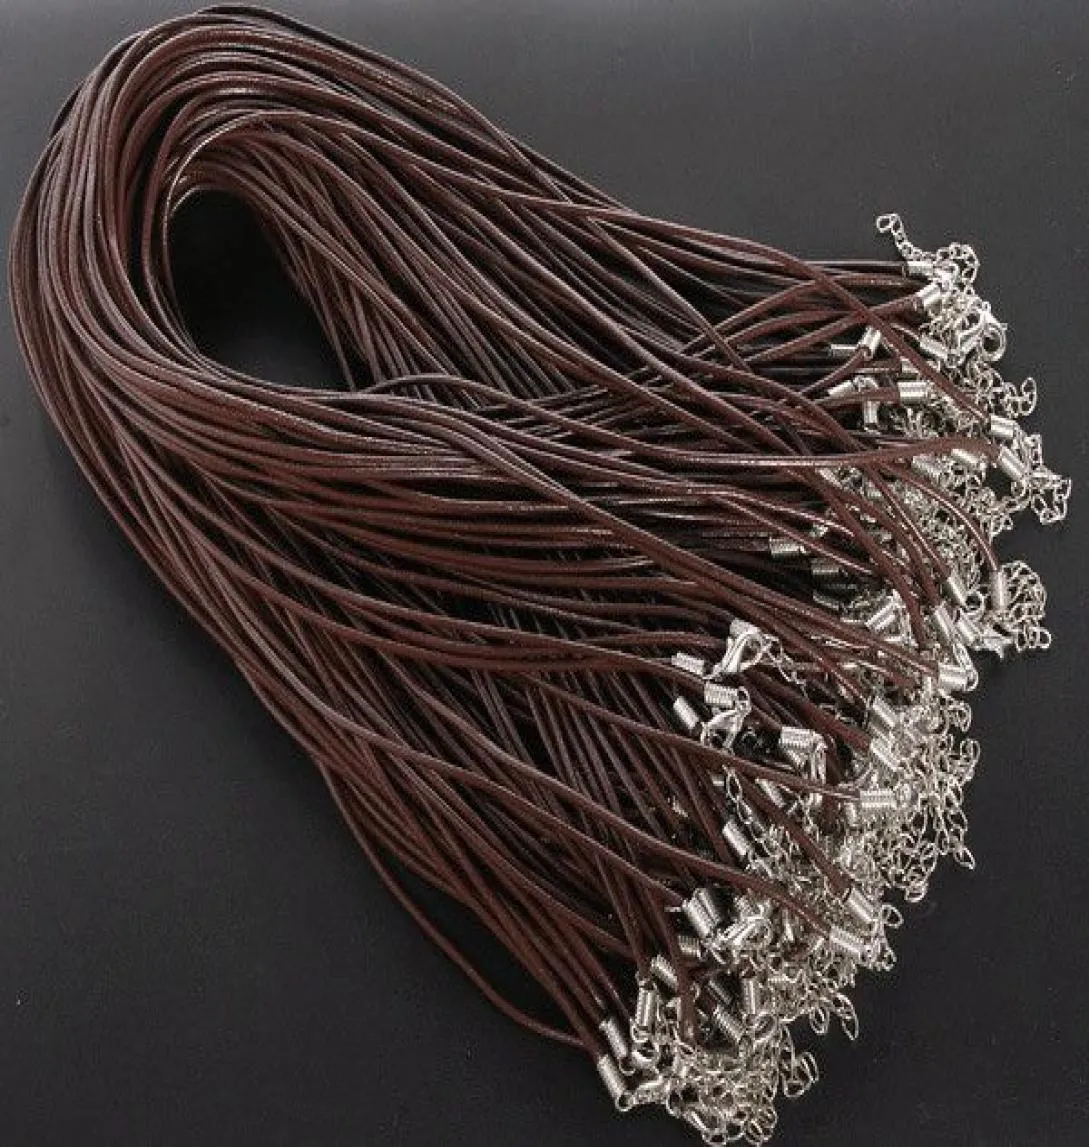 MIC NEW 100PCSLOT COFFEE REAL LEATHER NECKLABES CORD W CLASPS 185quot smycken Fynd komponenter4387452